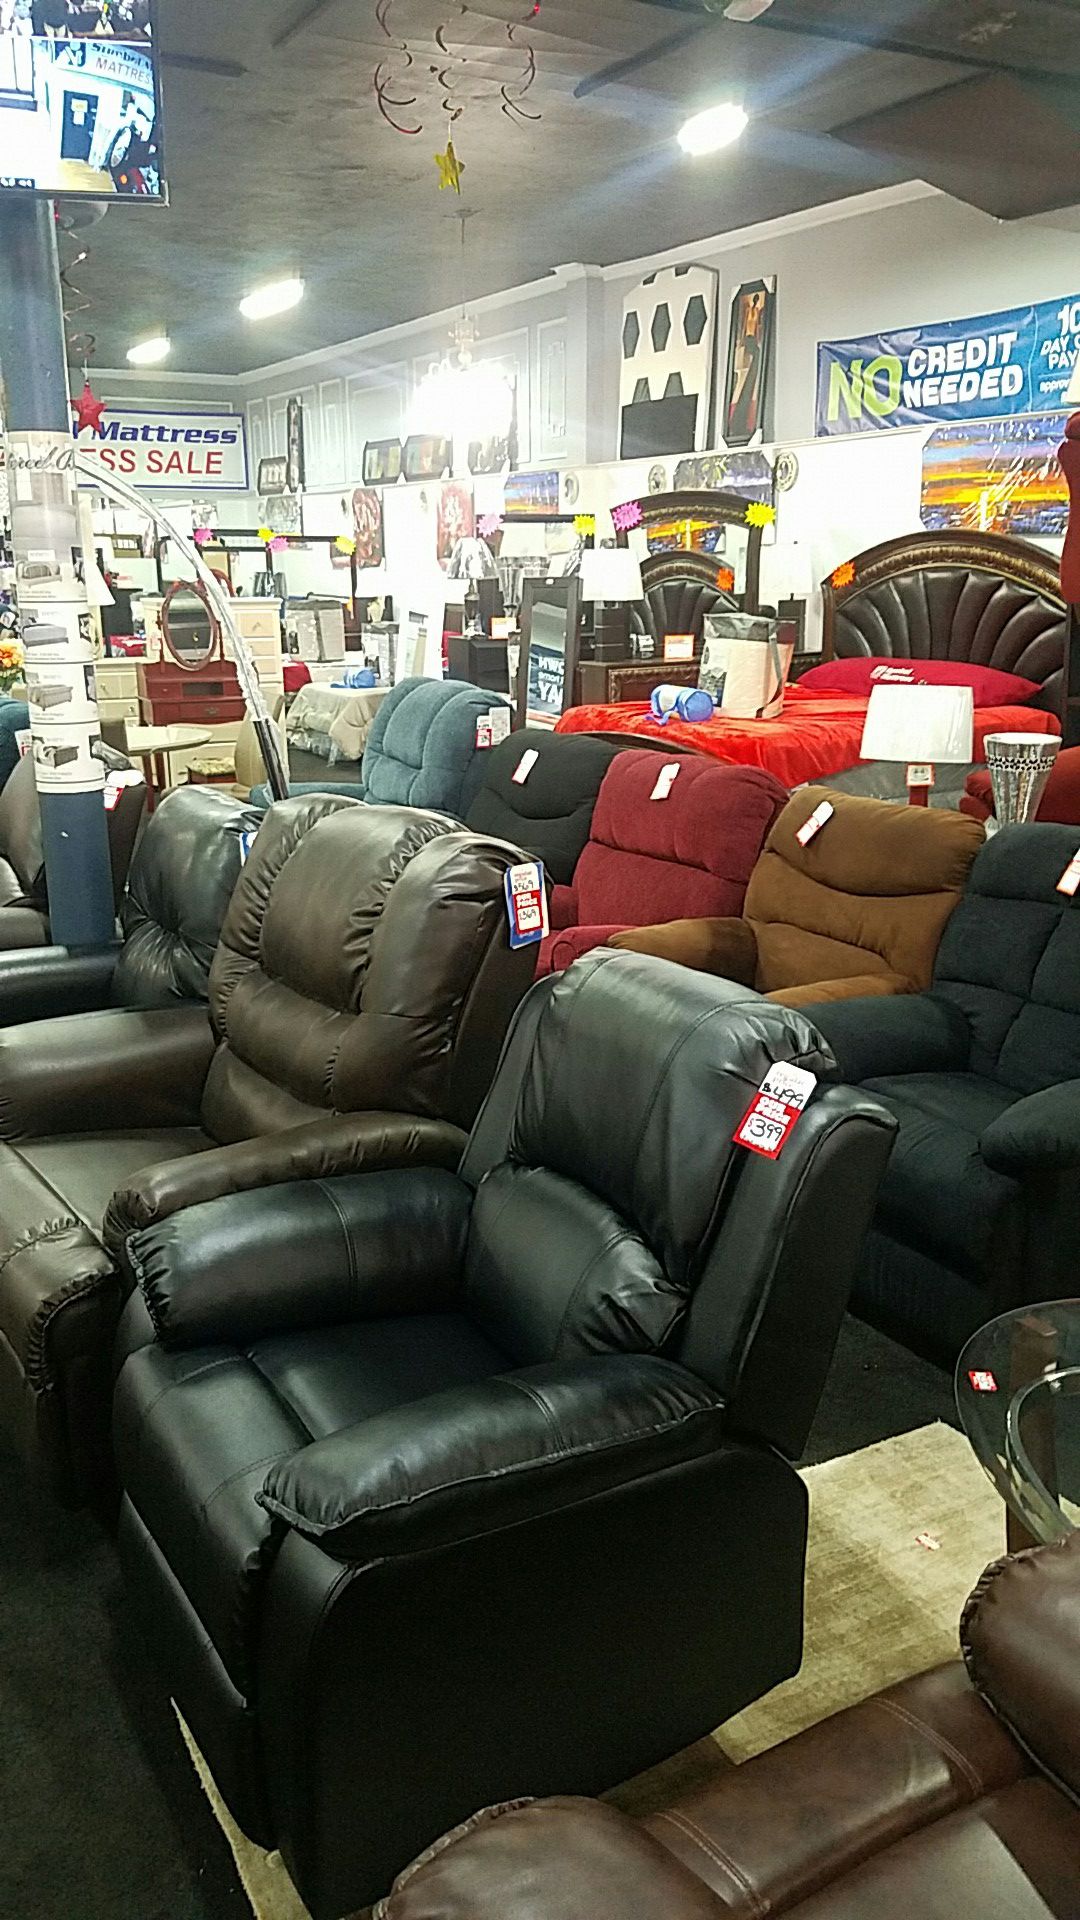 Recliners starting at $269